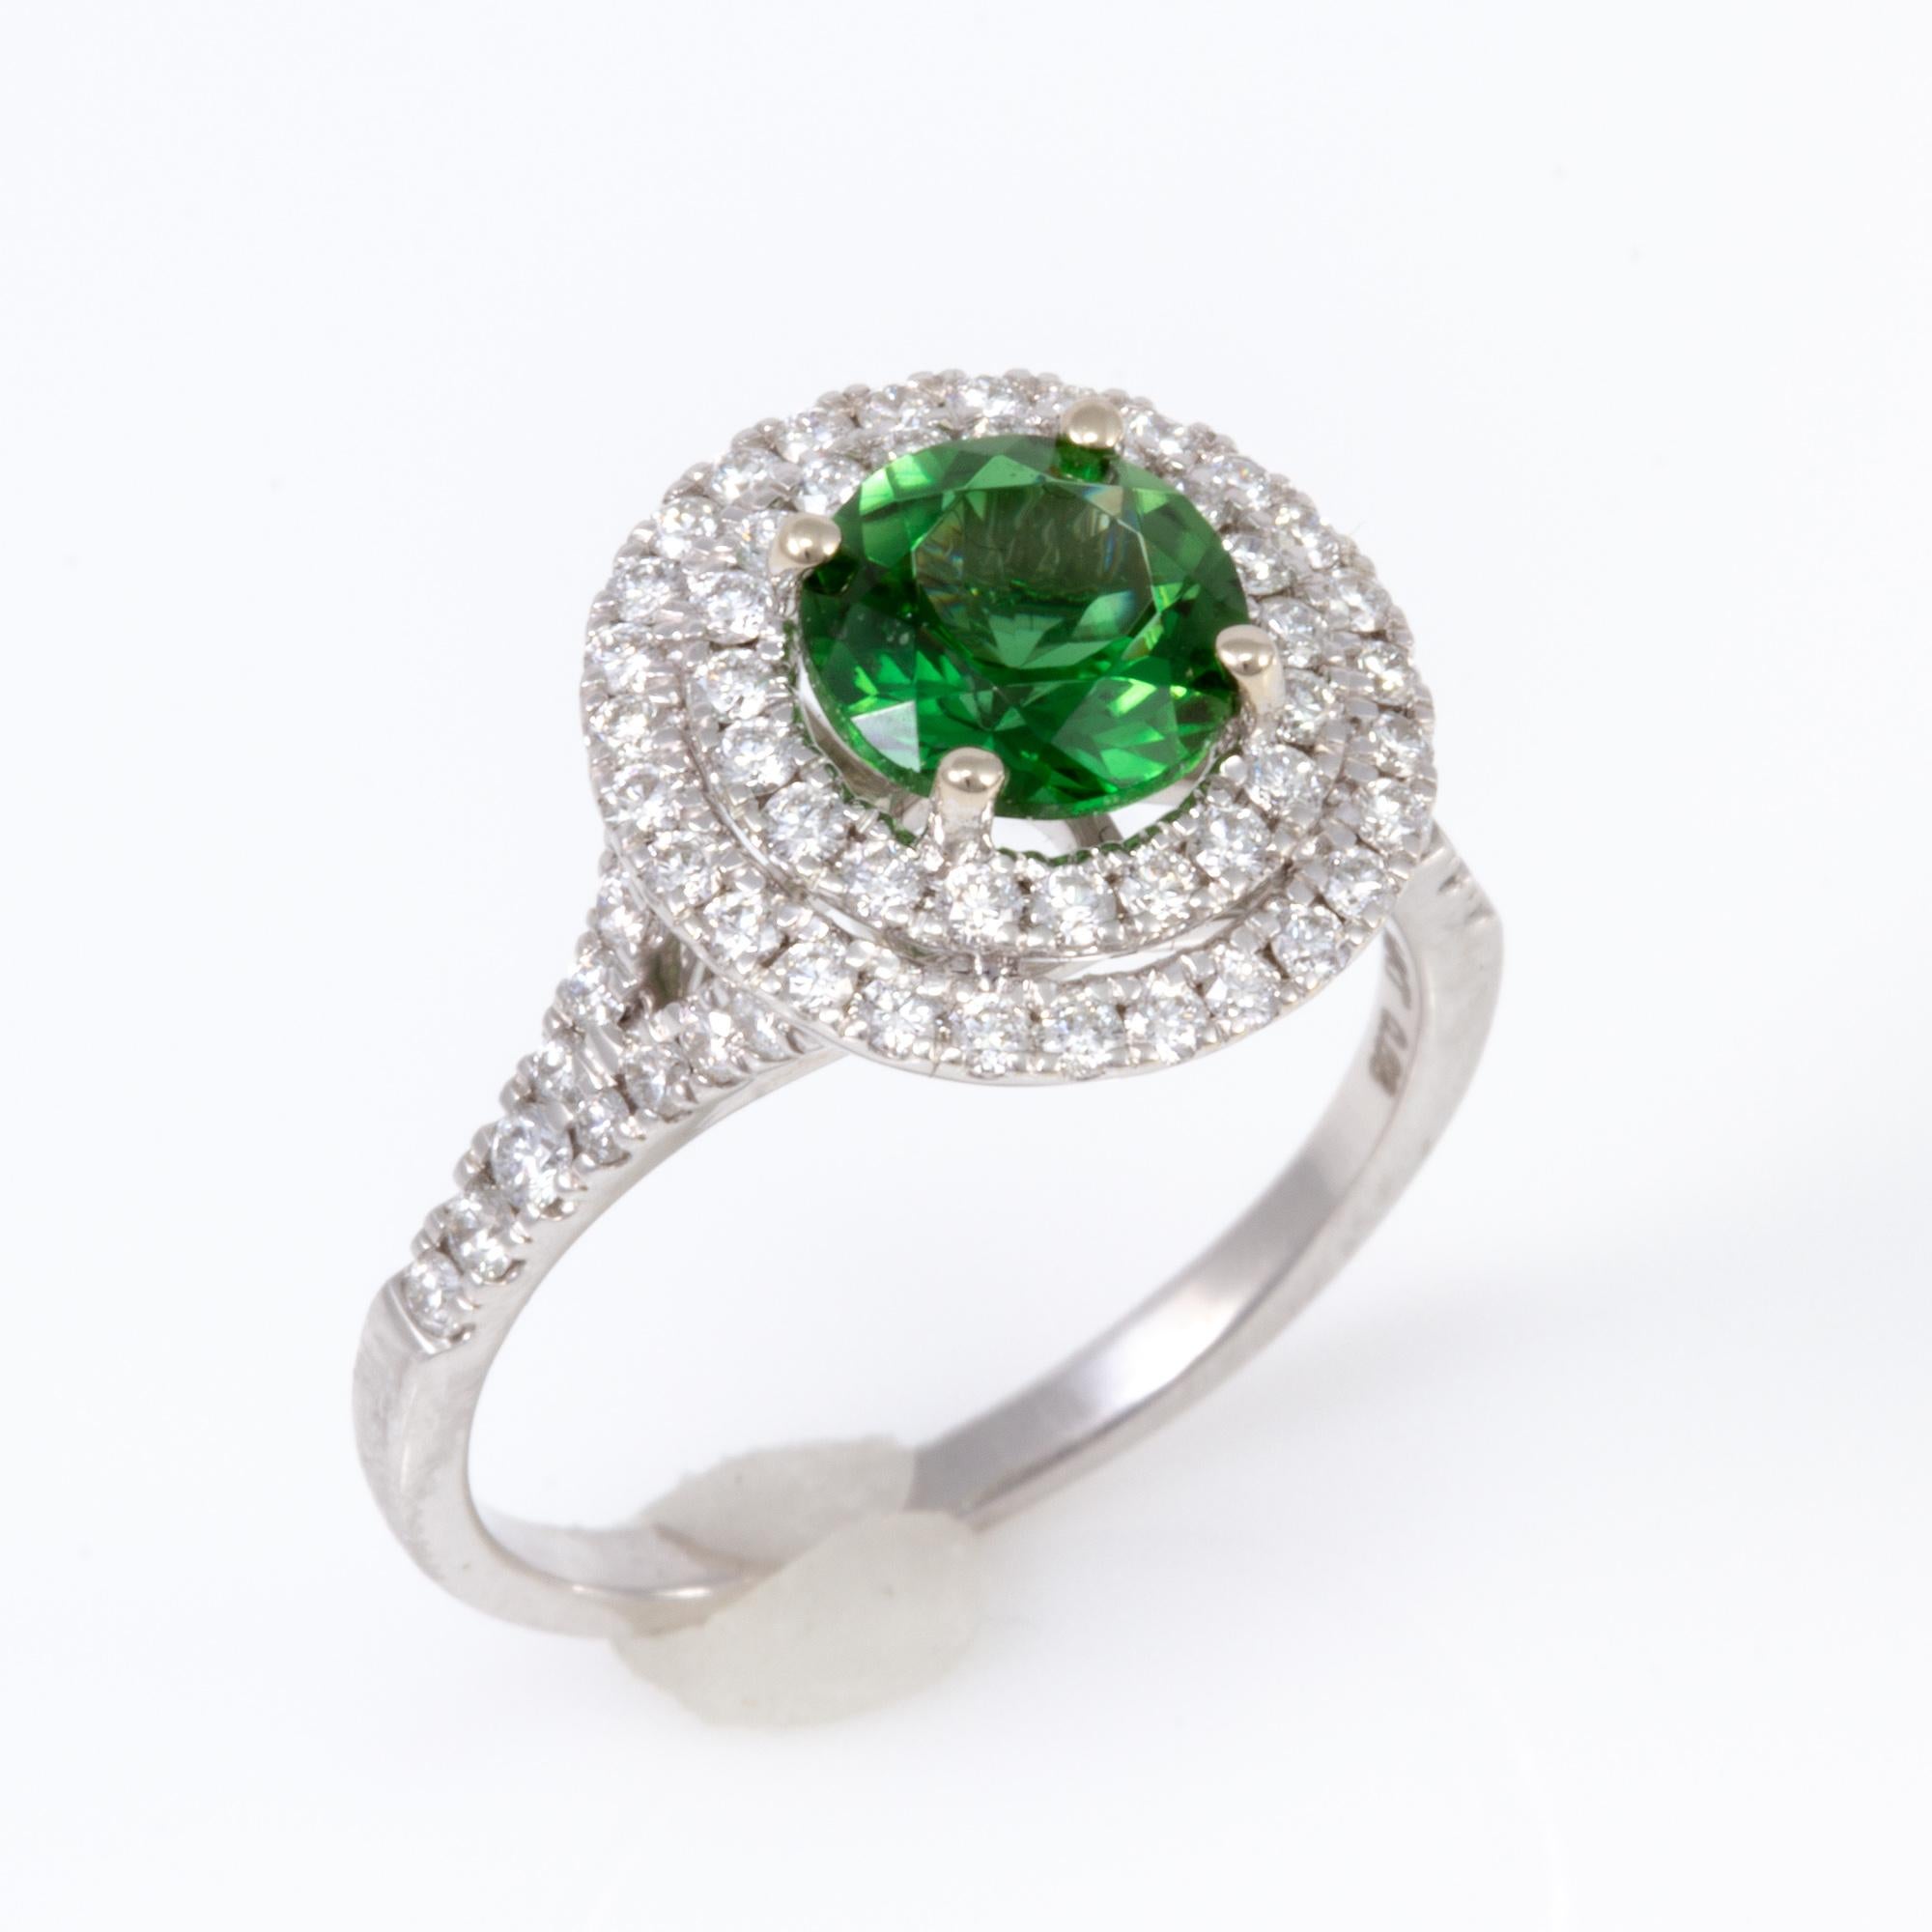 This exceptional Tourmaline is surrounded by a double halo of well cut diamonds weighing  .75 carats.  It is set in 14 karat white gold and was made in America.  Fine Chrome Tourmaline is quite hard to come by, with only Paraiba more rare as far as